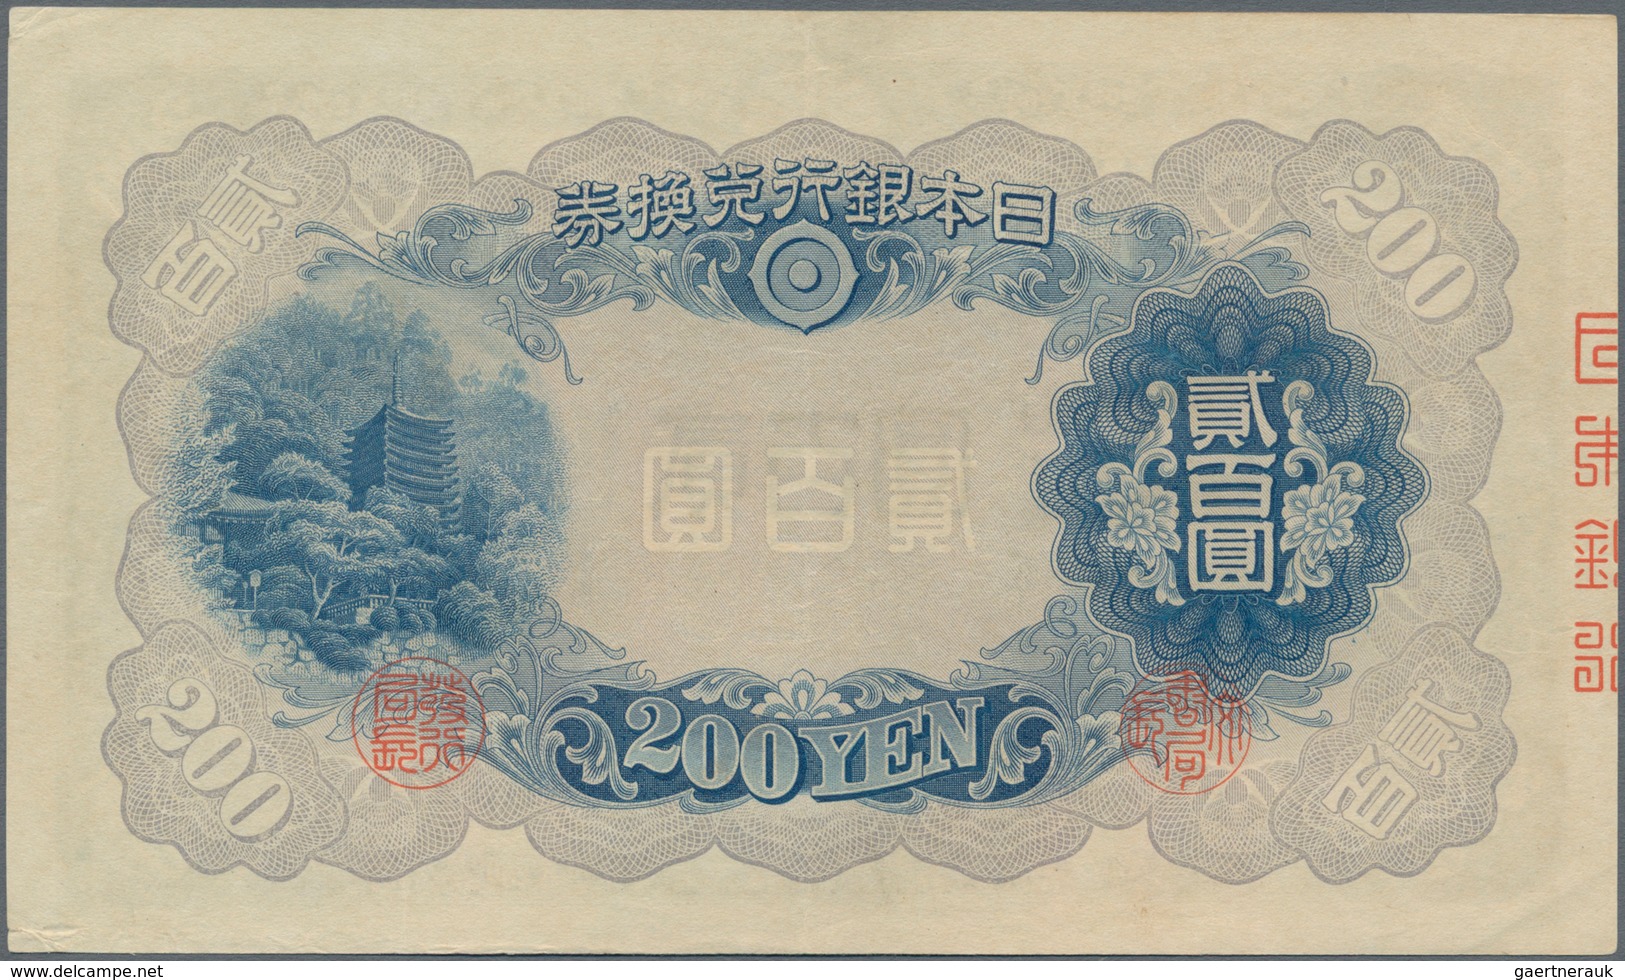 Japan: 200 Yen 1945, P.44a, Tiny Dint At Upper And Lower Right And Soft Vertical Bend. Condition: XF - Japan